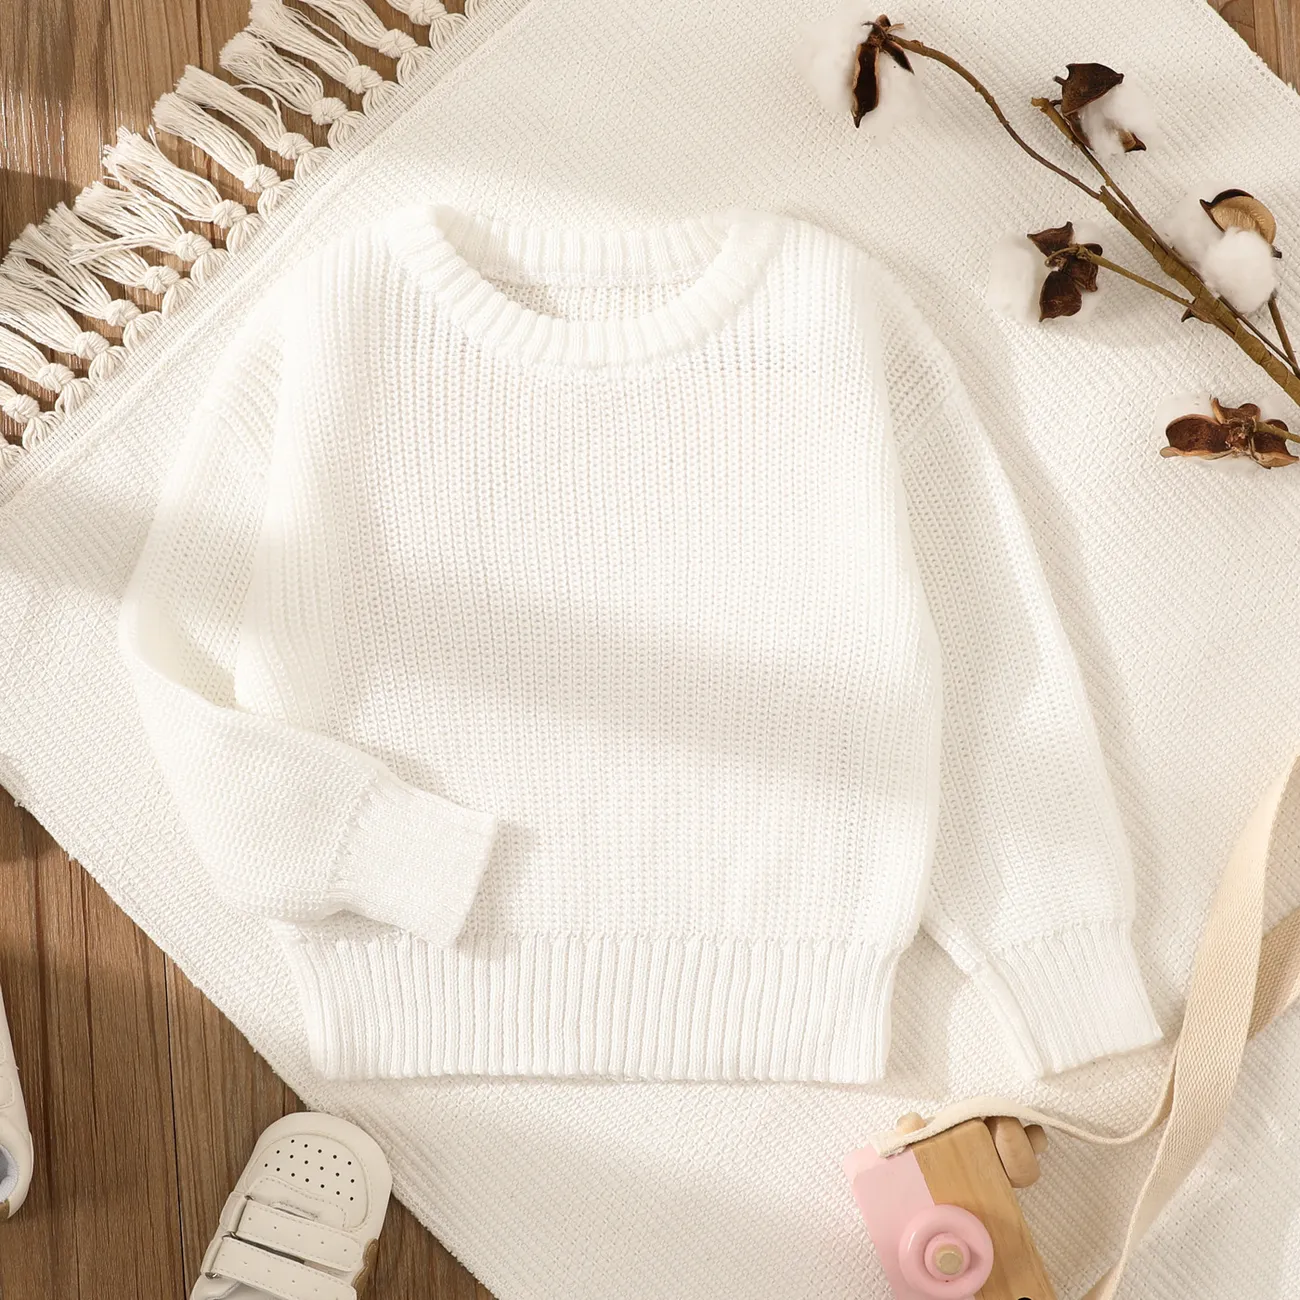 Baby Solid Long-sleeve Knitted Sweater Pullover White big image 1